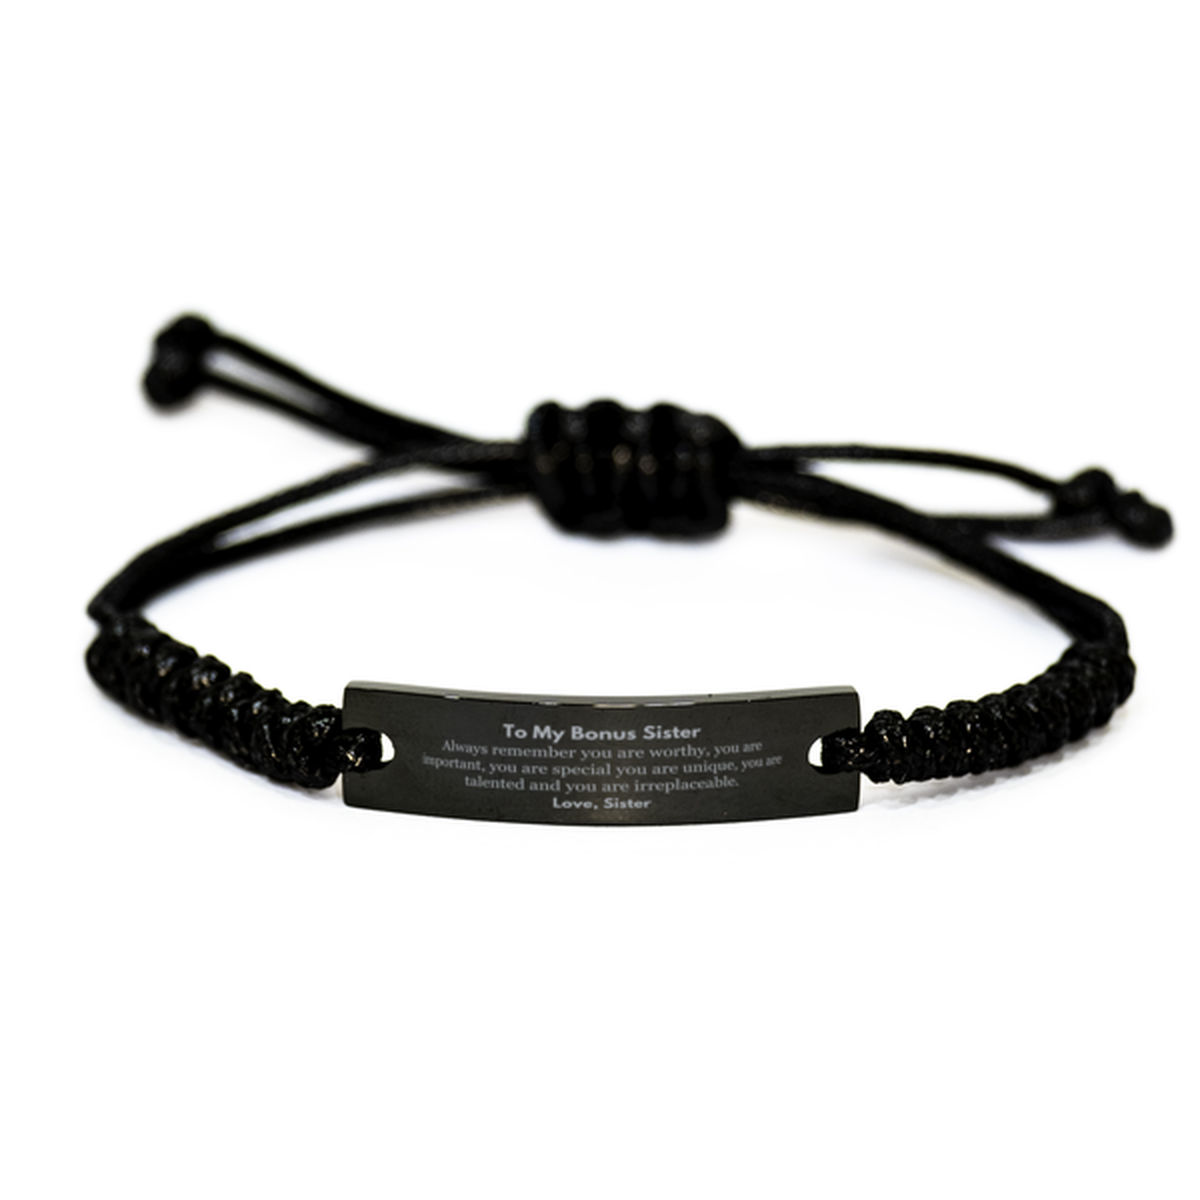 Bonus Sister Birthday Gifts from Sister, Inspirational Black Rope Bracelet for Bonus Sister Christmas Graduation Gifts for Bonus Sister Always remember you are worthy, you are important. Love, Sister